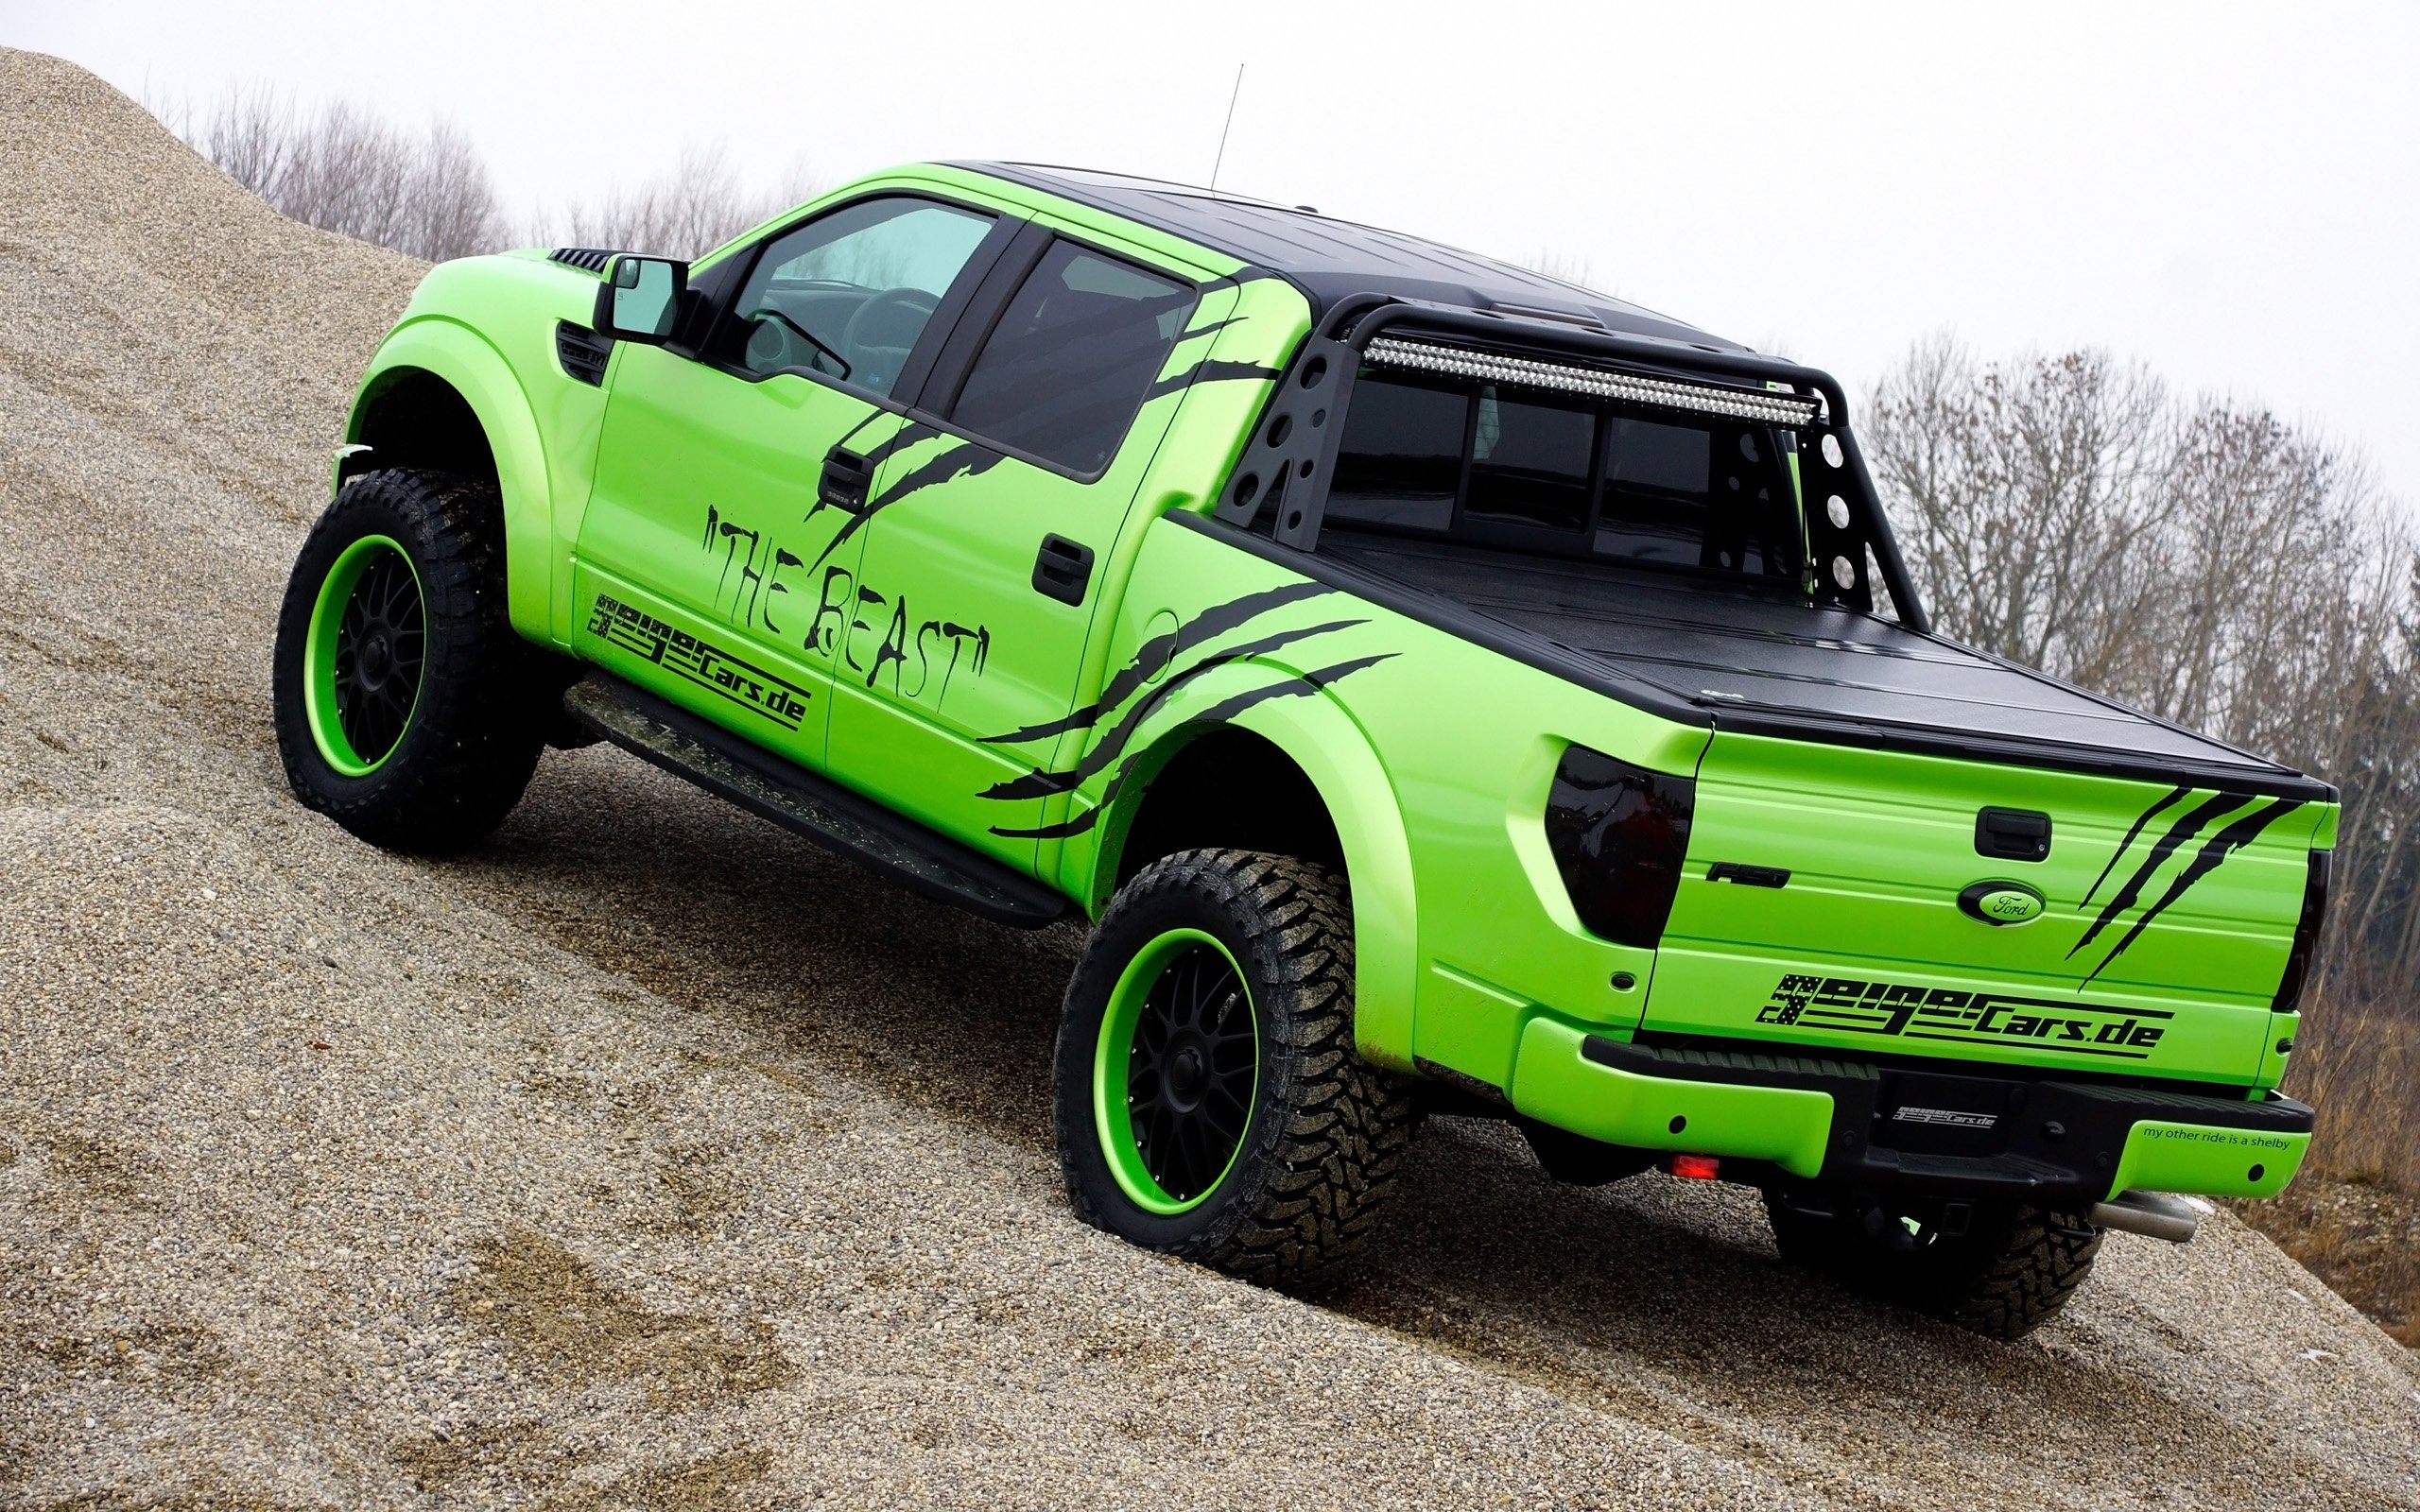 2014, Geigercars, Ford, F 150, Svt, Raptor, Beast, Pickup, Muscle, Tuning, Hot, Rod, Rods, Te Wallpaper